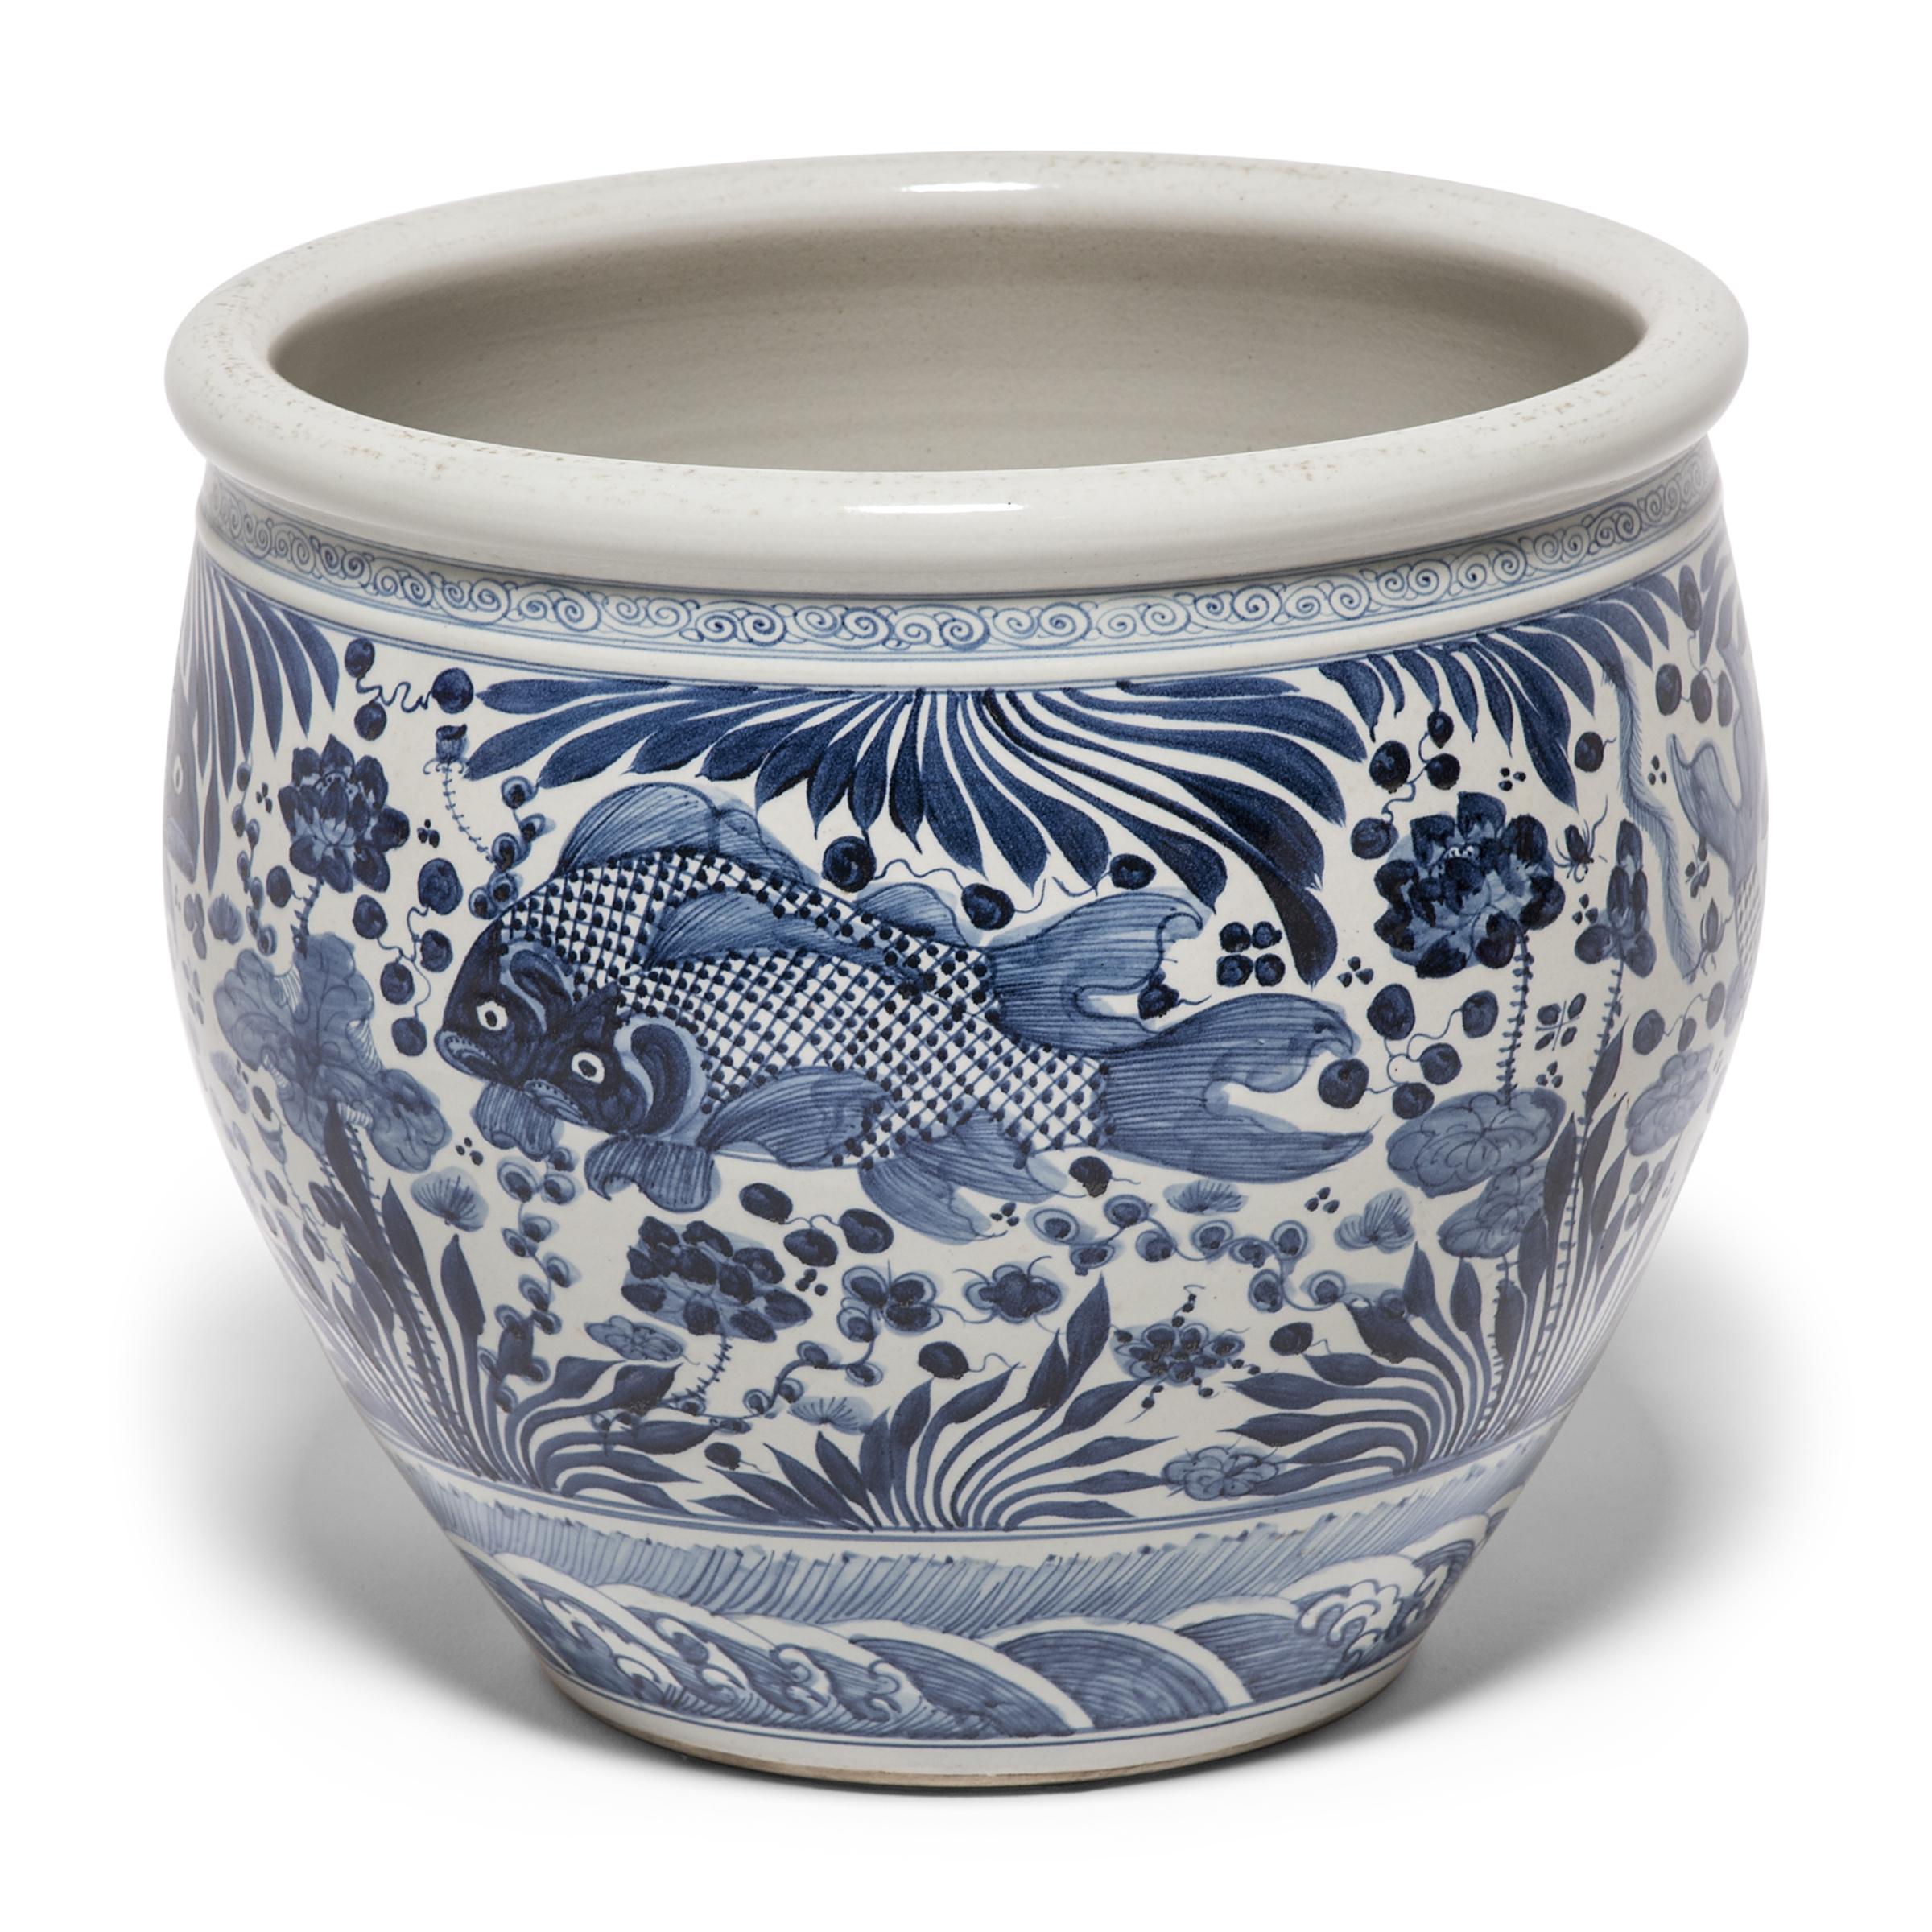 This grand, blue and white porcelain bowl is hand painted with flora and fauna of the sea, offering blessings of wealth, abundance, and the contented harmony of a fish in water. Chinese blue-and-white ceramics have inspired ceramists worldwide since